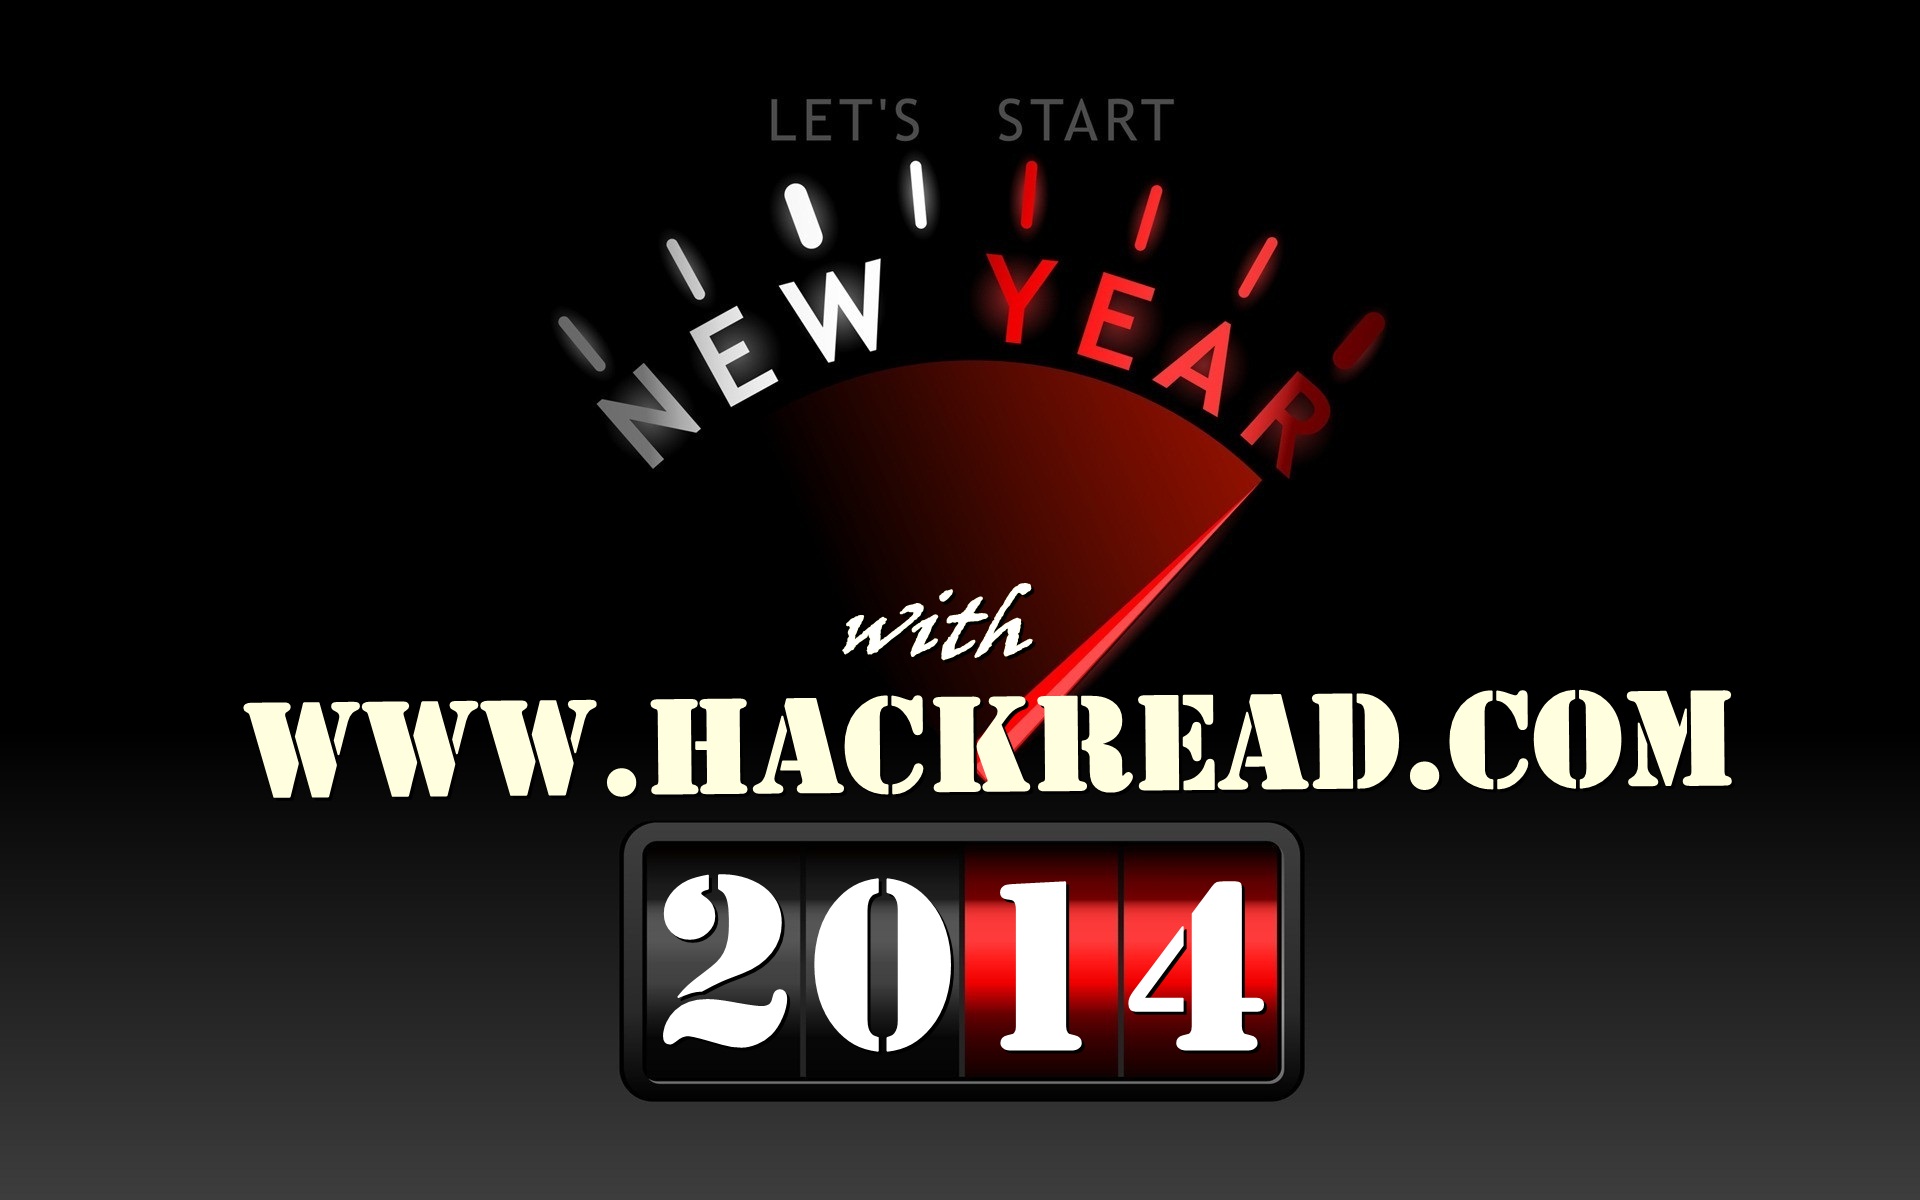 happy-new-year-2014-and-seasons-greetings-from-team-hackread-com